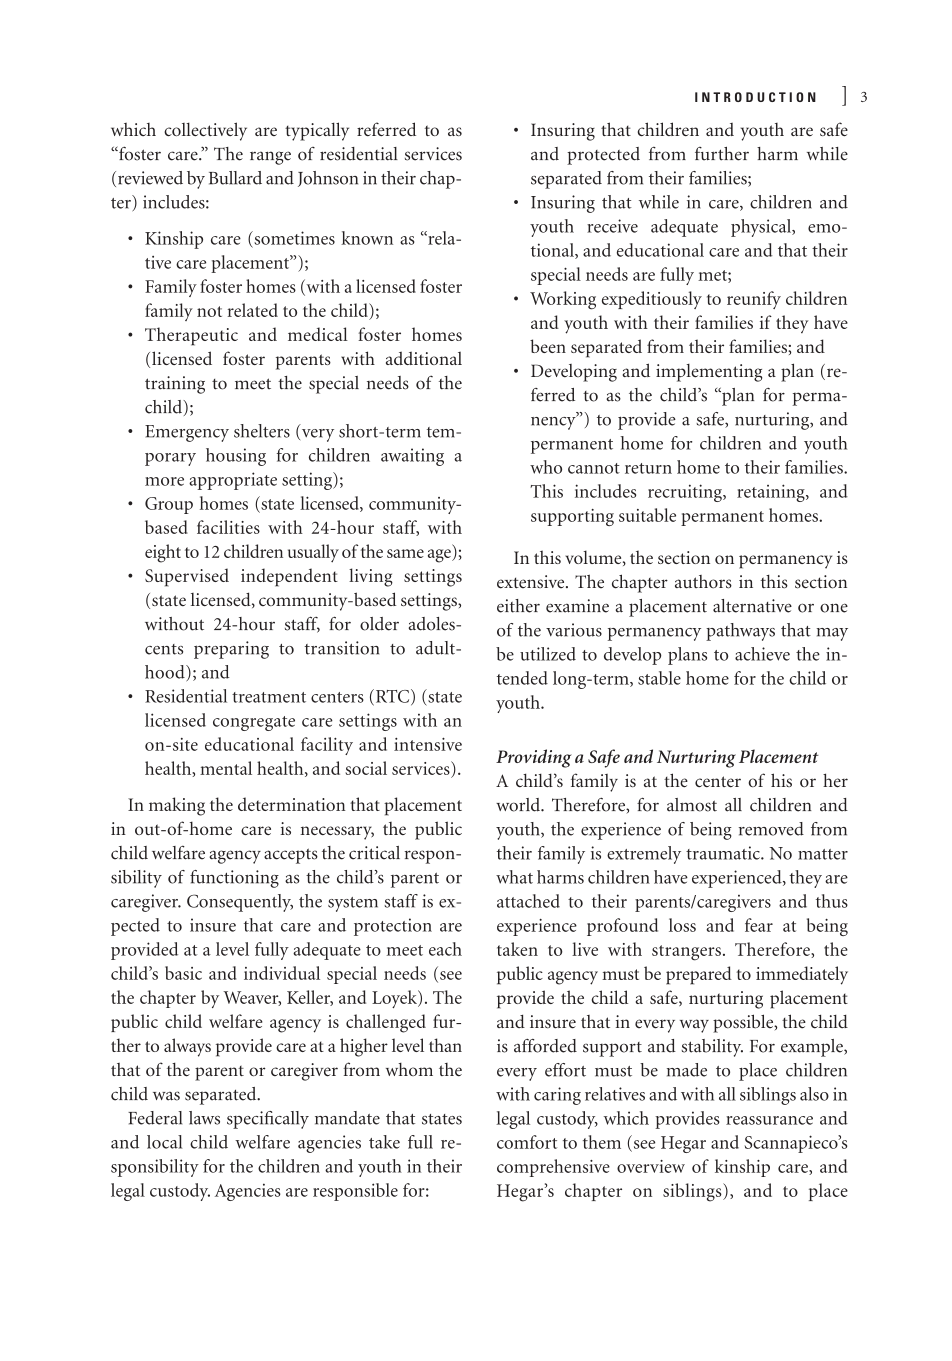 Child Welfare for the Twenty-first Century: A Handbook of Practices, Policies, and Programs page 3